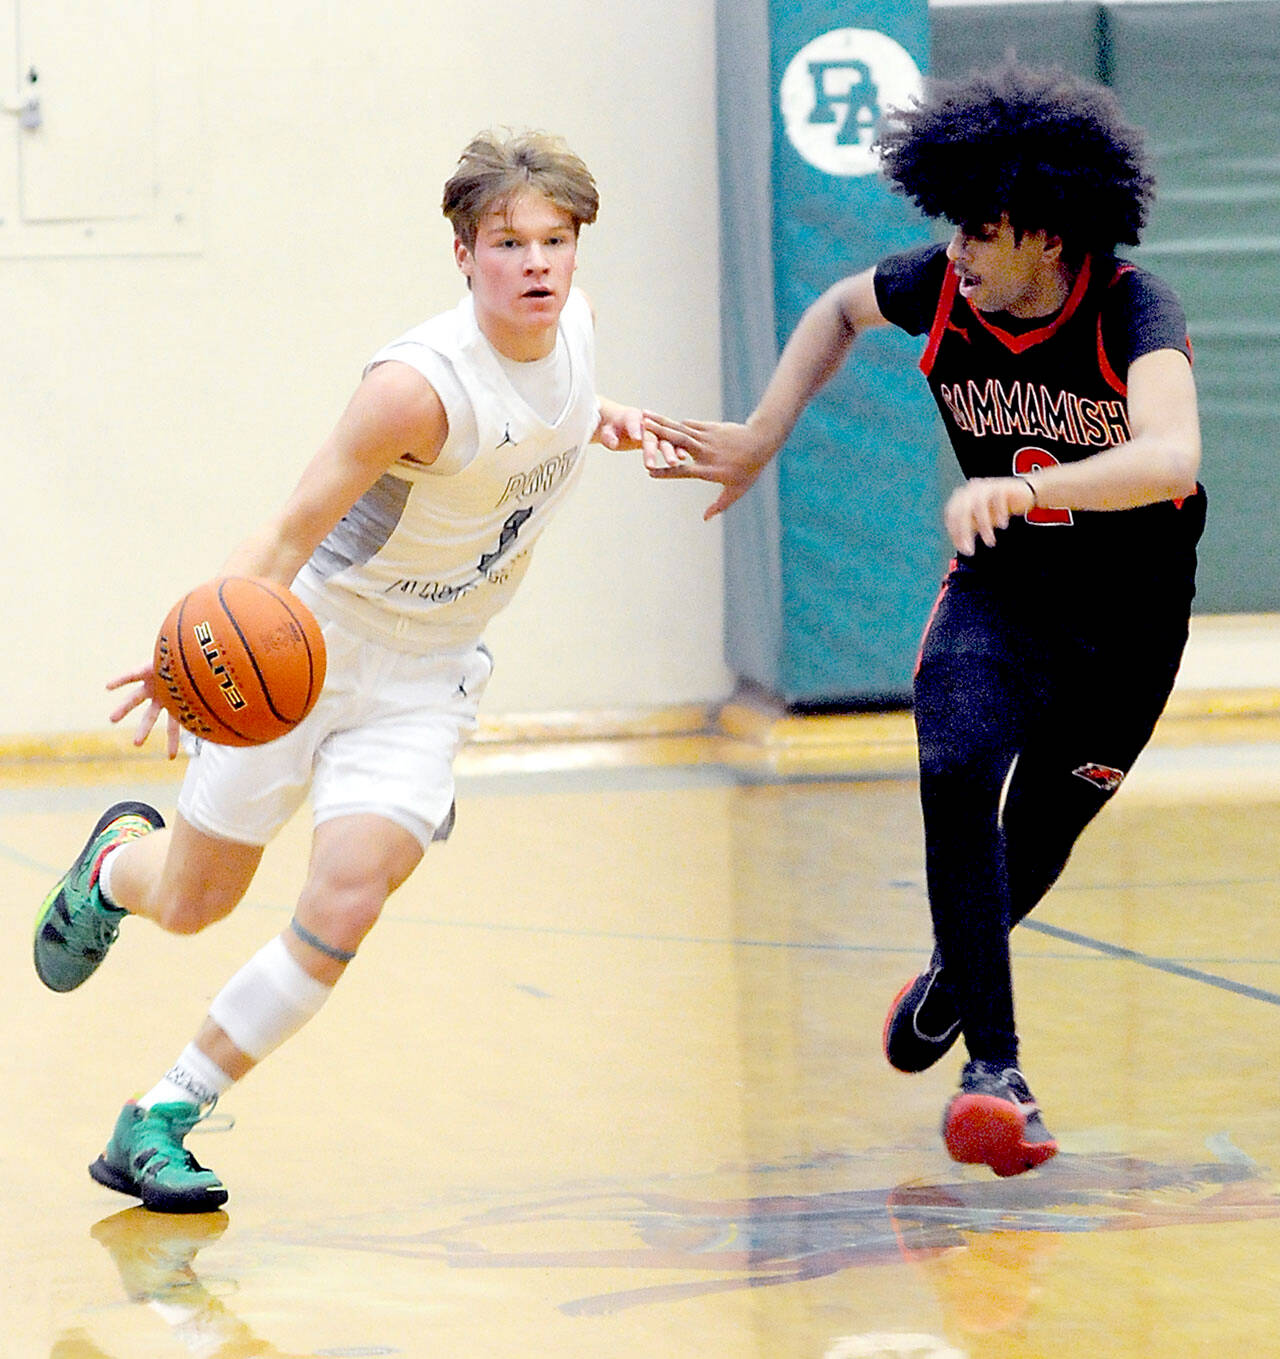 Port Angeles’ Gus Halberg, left, drives down court paced by Sammamish’s Rakin Showki on Wednesday night in Port Angeles. Halberg is expected to be a big contributor this year for the Roughriders. (Keith Thorpe/Peninsula Daily News)